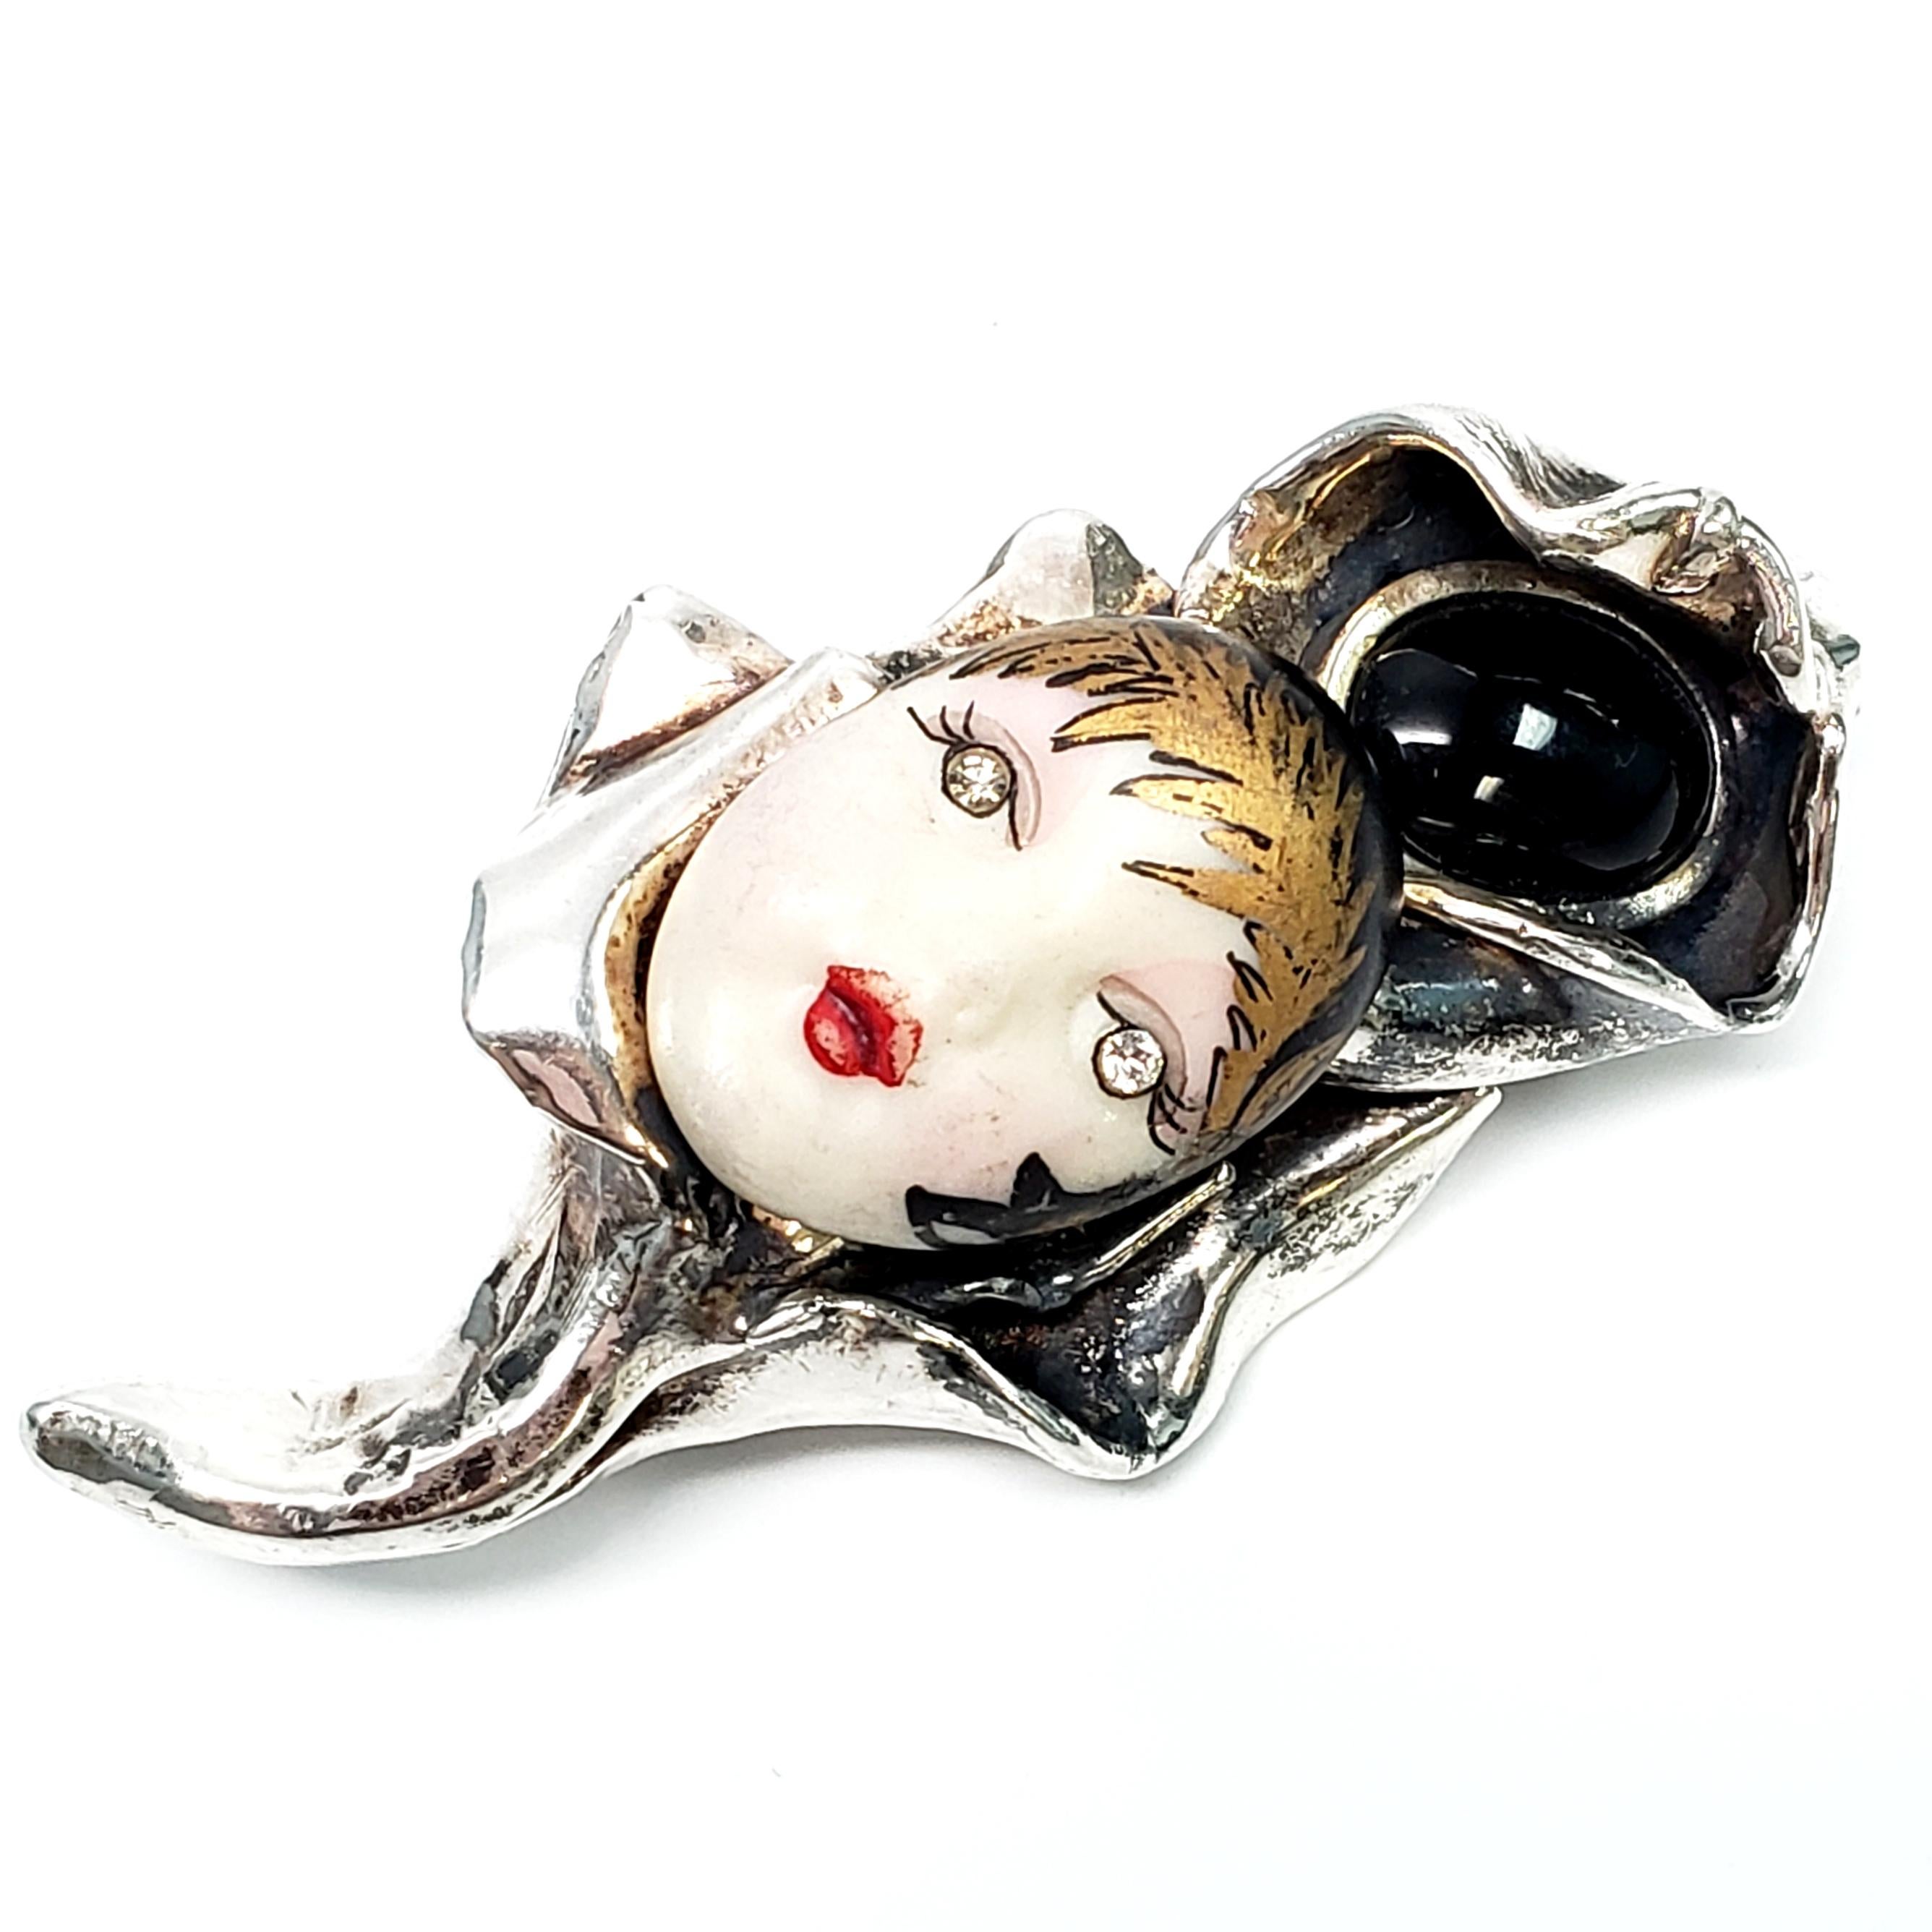 Sterling silver pin featuring an oval onyx stone and porcelain face by Eros.

This beautiful pin features a lady's painted face with crystal eyes, and an onyx bezel set in a sterling silver flower shaped pin.

Measures 1 3/8